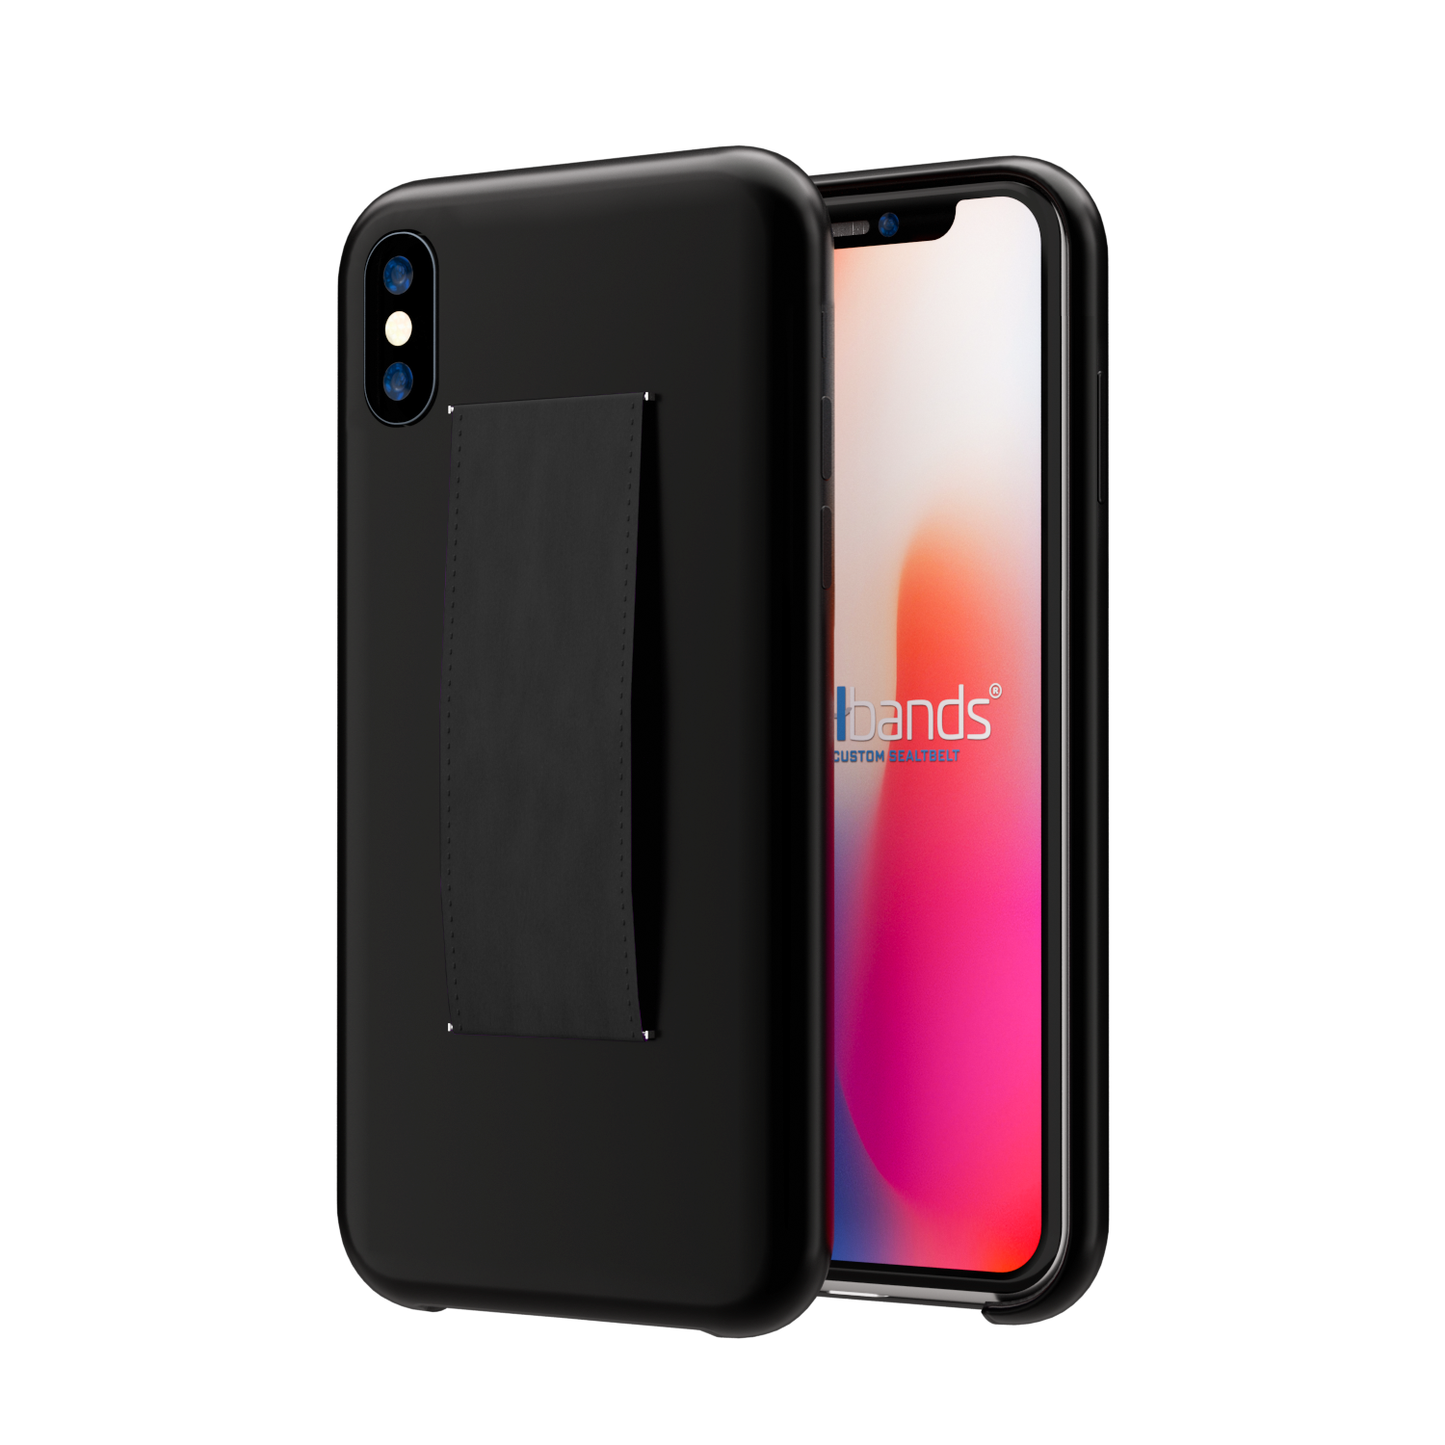 Switchbands Case & Black Band - iPhone XS MAX